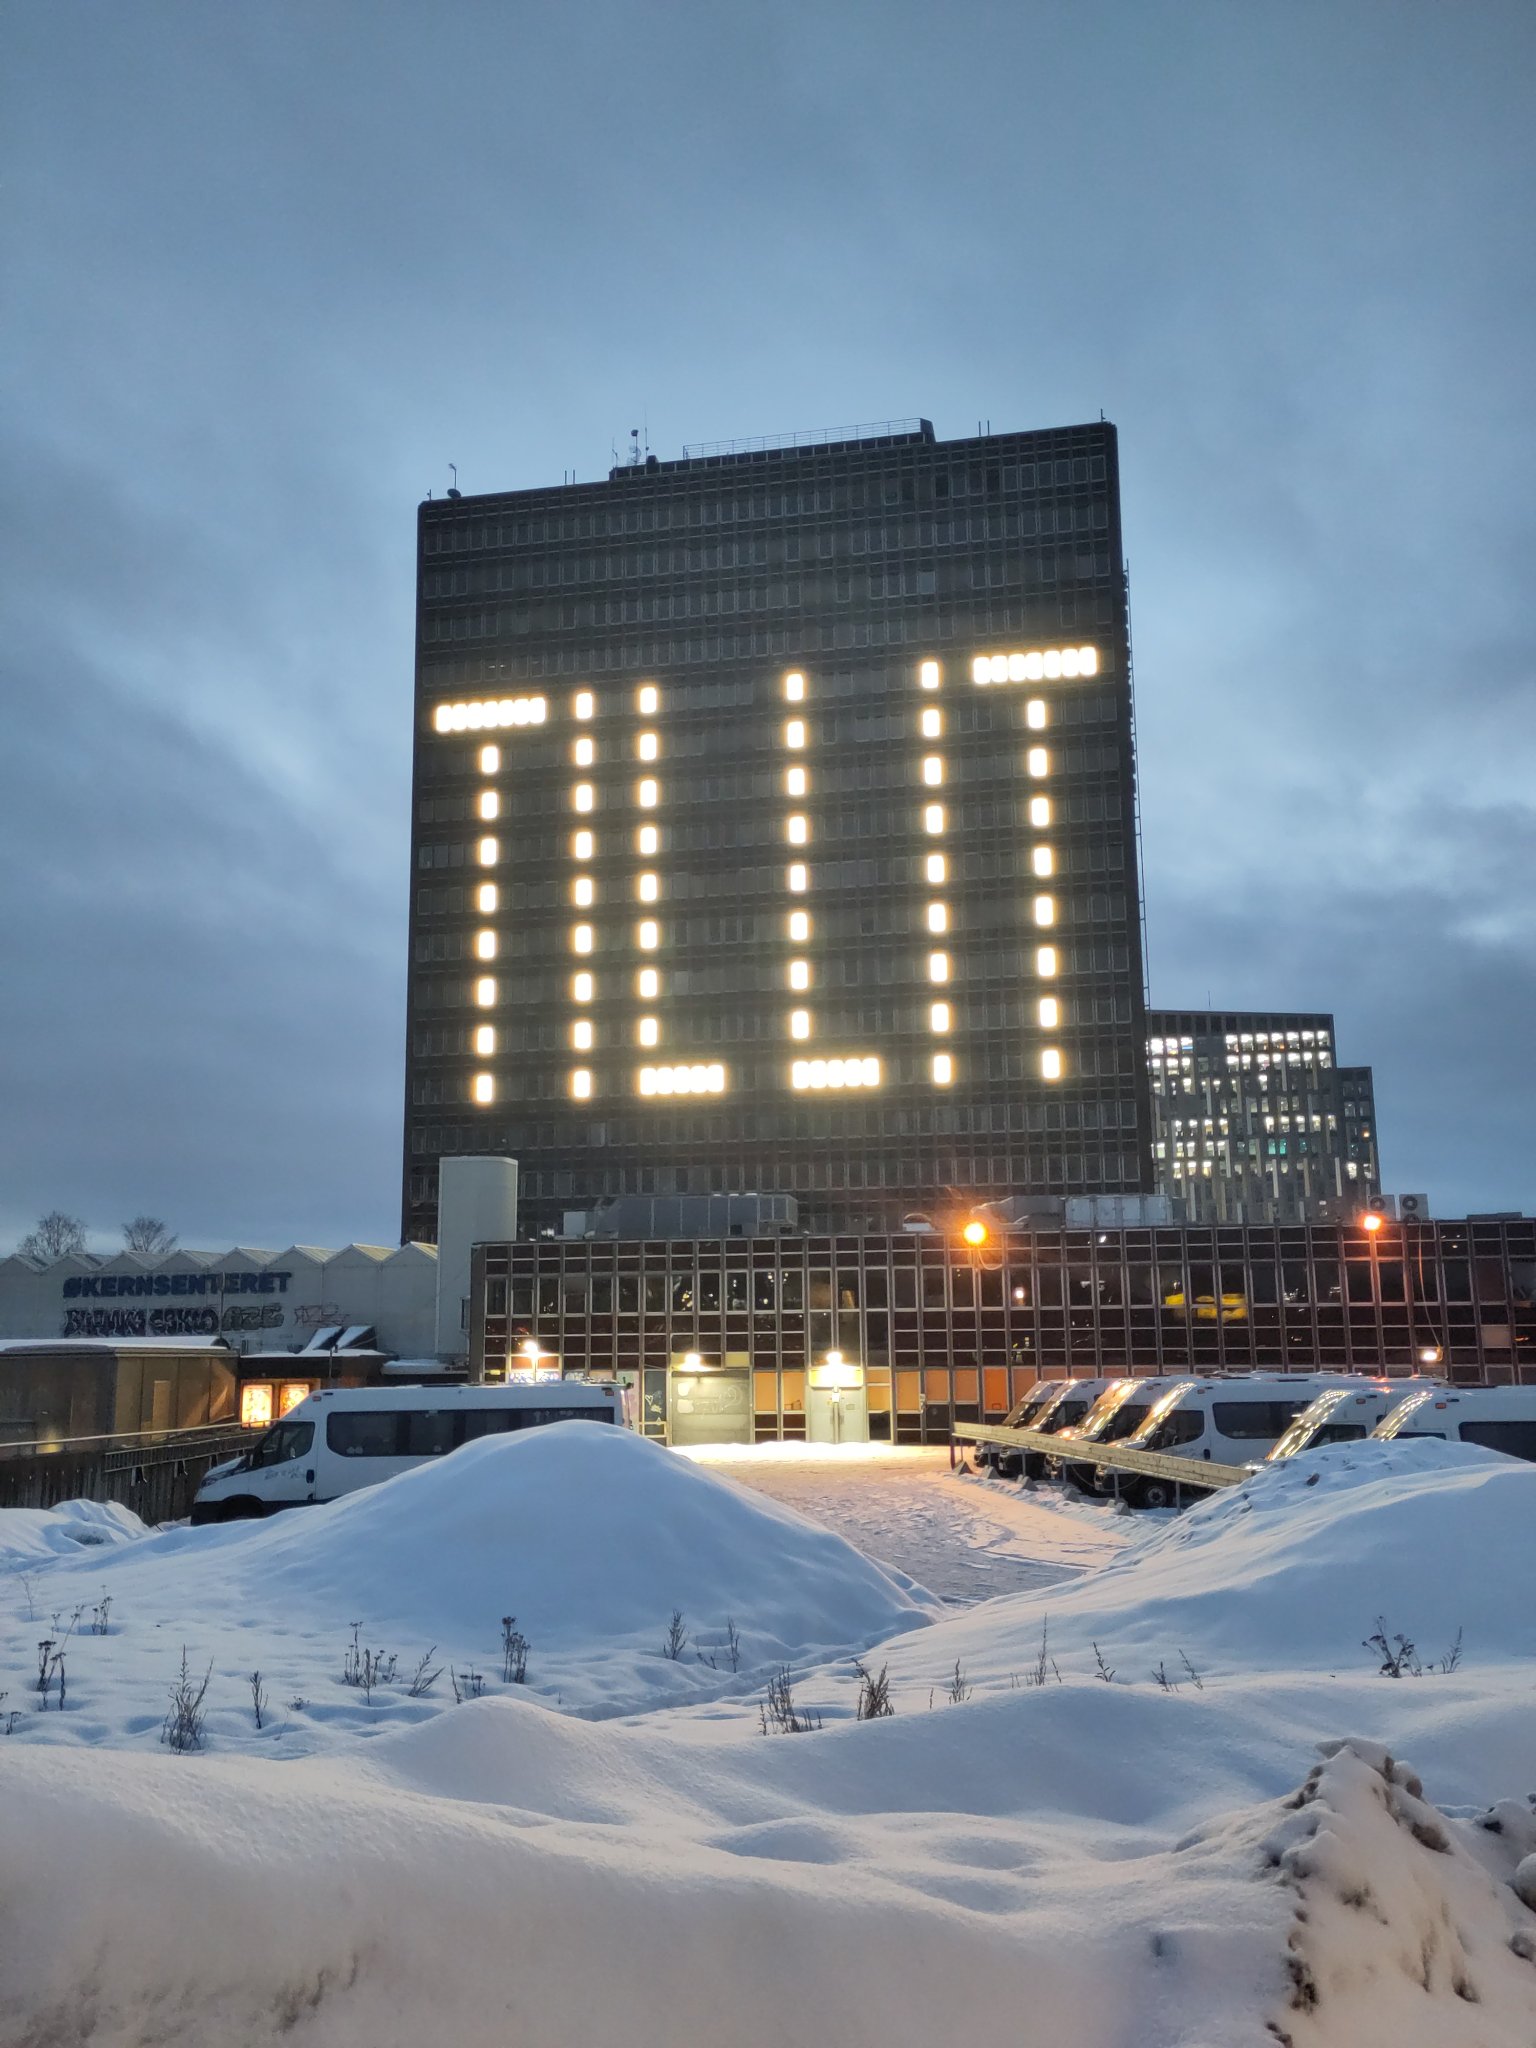 Building in Oslo during winter